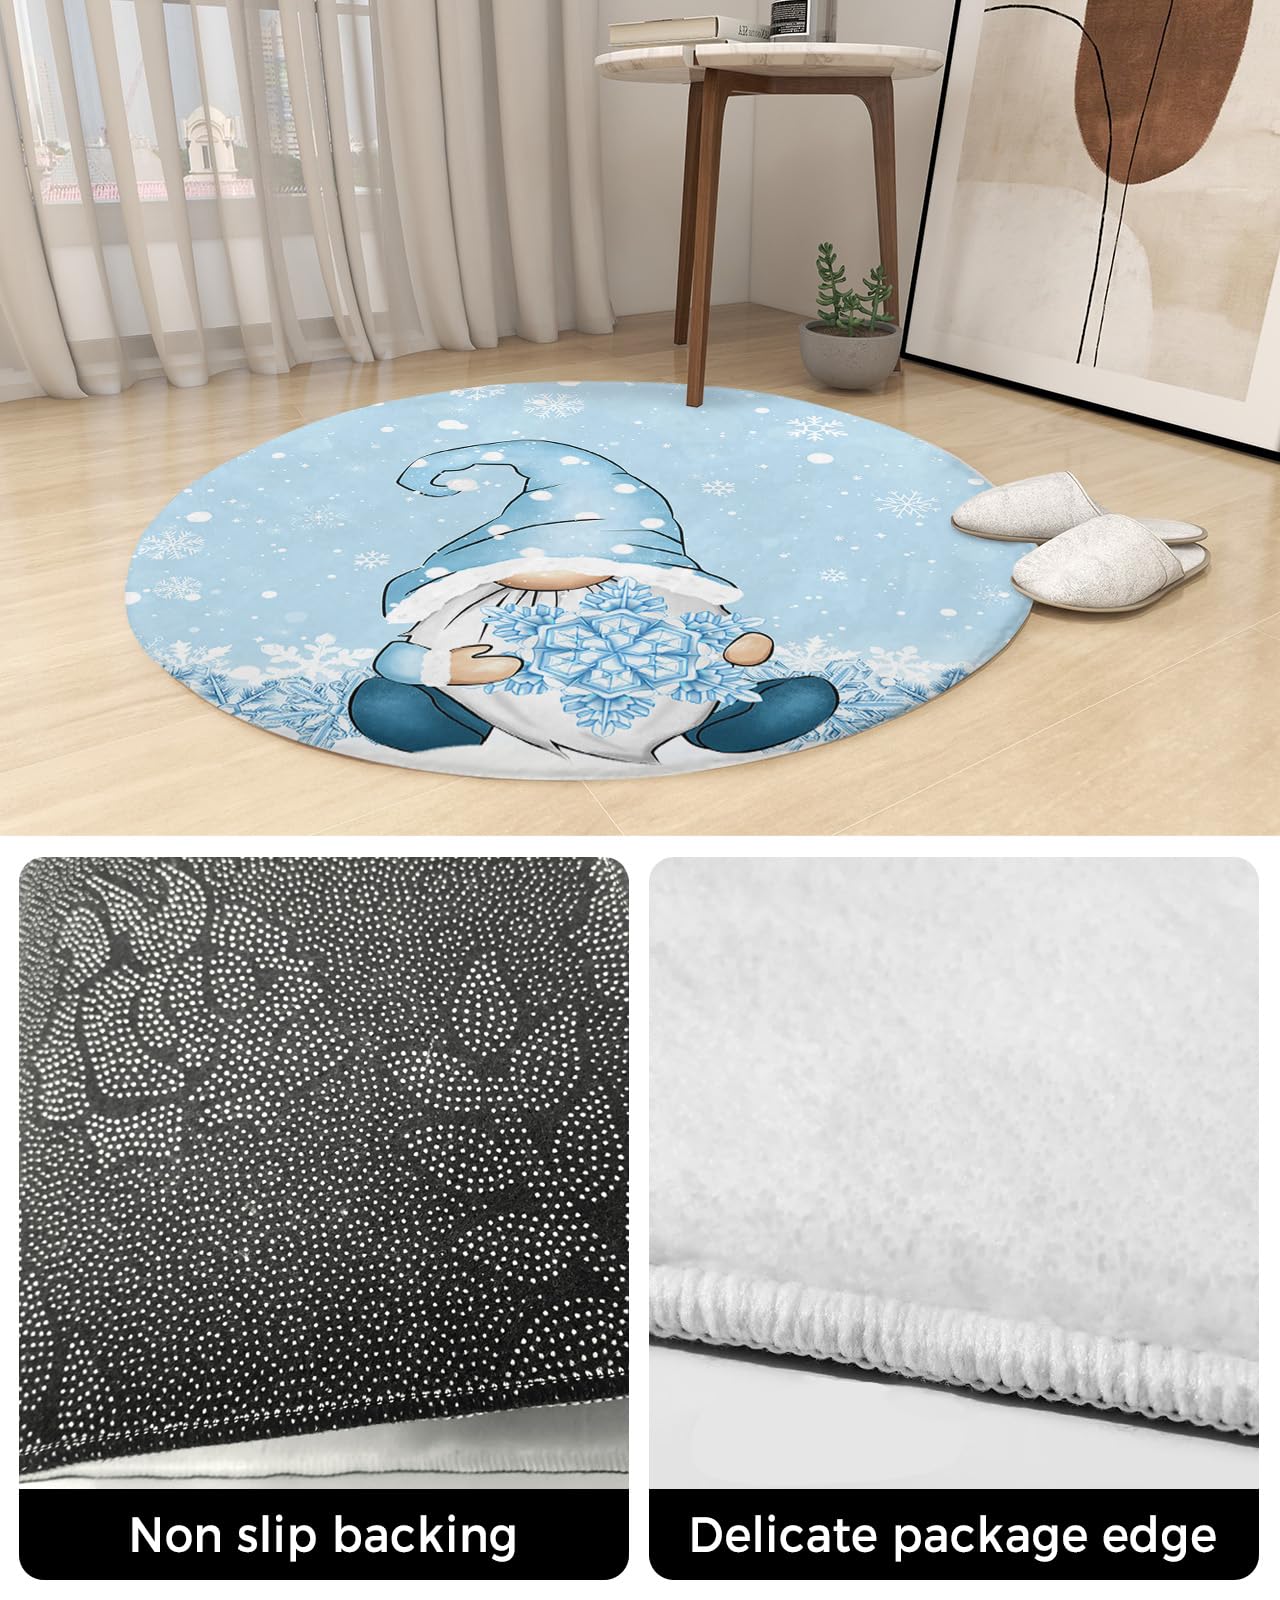 Winter Fluffy Round Area Rug Carpets 4ft, Plush Shaggy Carpet Soft Circular Rugs, Non-Slip Fuzzy Accent Floor Mat for Living Room Bedroom Nursery Home Decor Christmas Gnomes Blue Snowflake